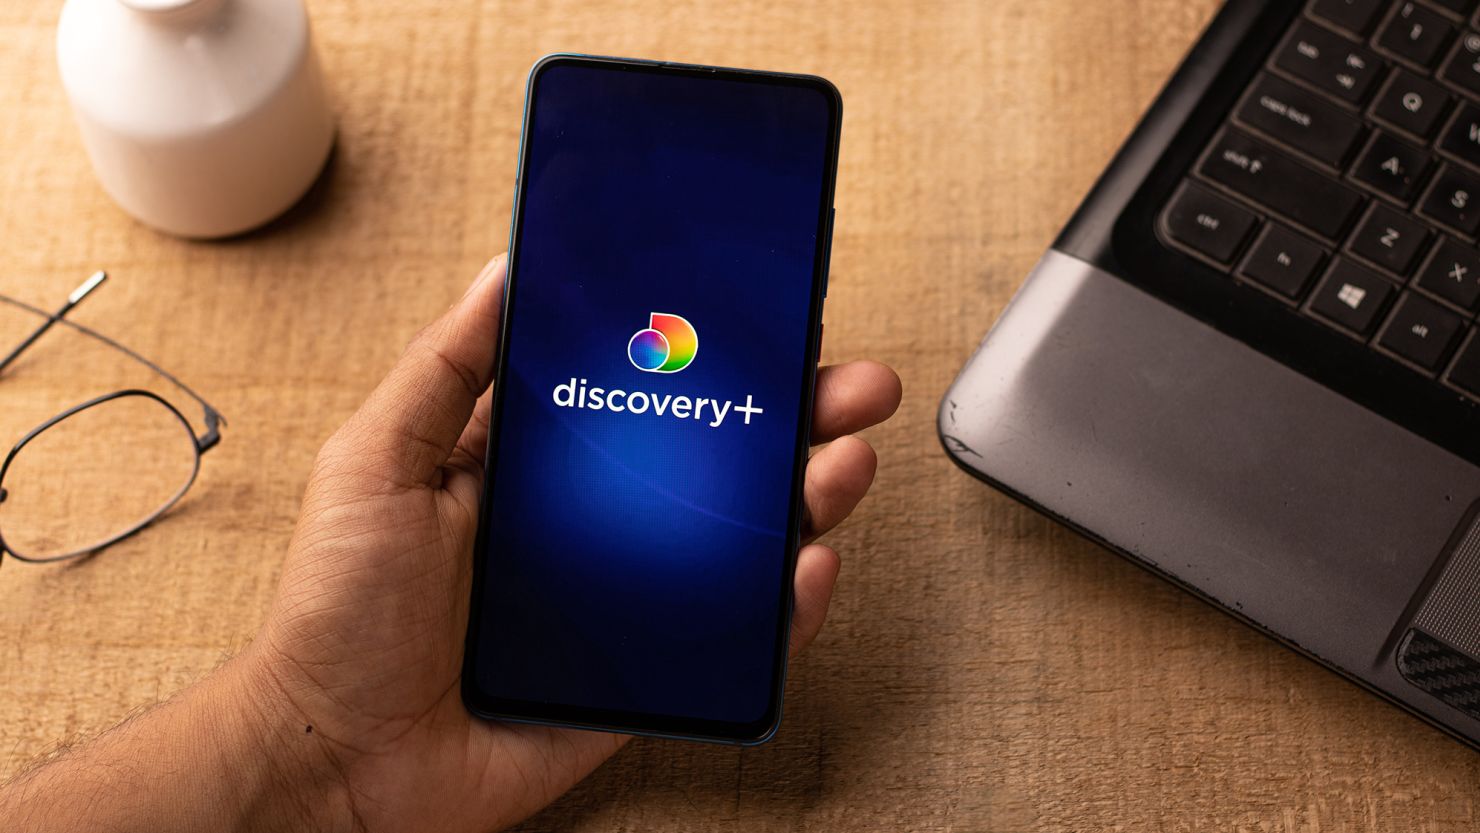 Discovery+ is sticking around. It's a strategy shift for Warner